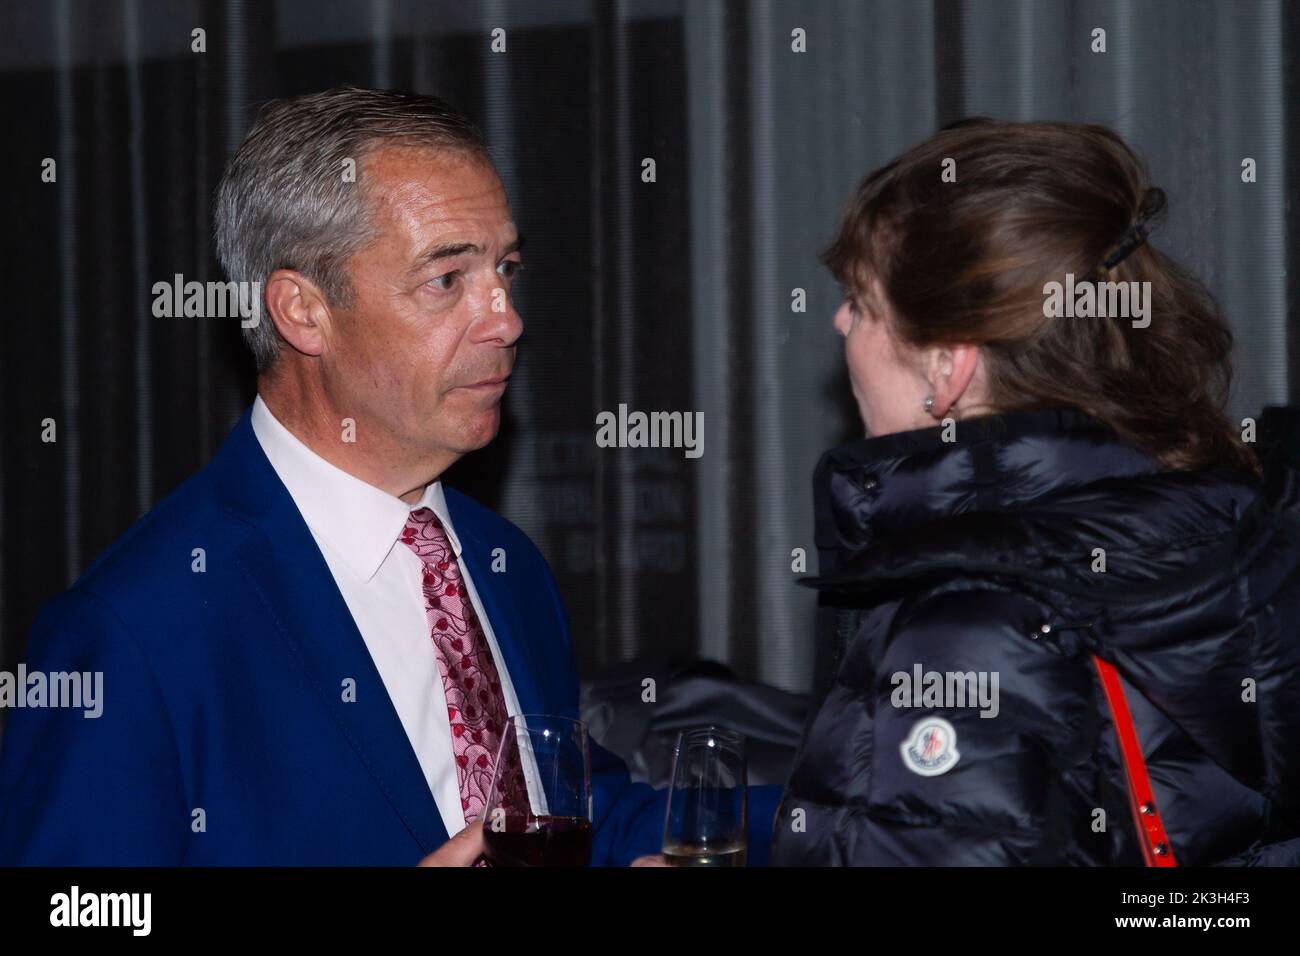 Melbourne, Australia, 26 September, 2022. Nigel Farage is seen having a conversation with a guest during An Evening With Nigel Farage at The Melbourne Convention and Exhibition Centre on September 26, 2022 in Melbourne, Australia. Credit: Dave Hewison/Speed Media/Alamy Live News Stock Photo